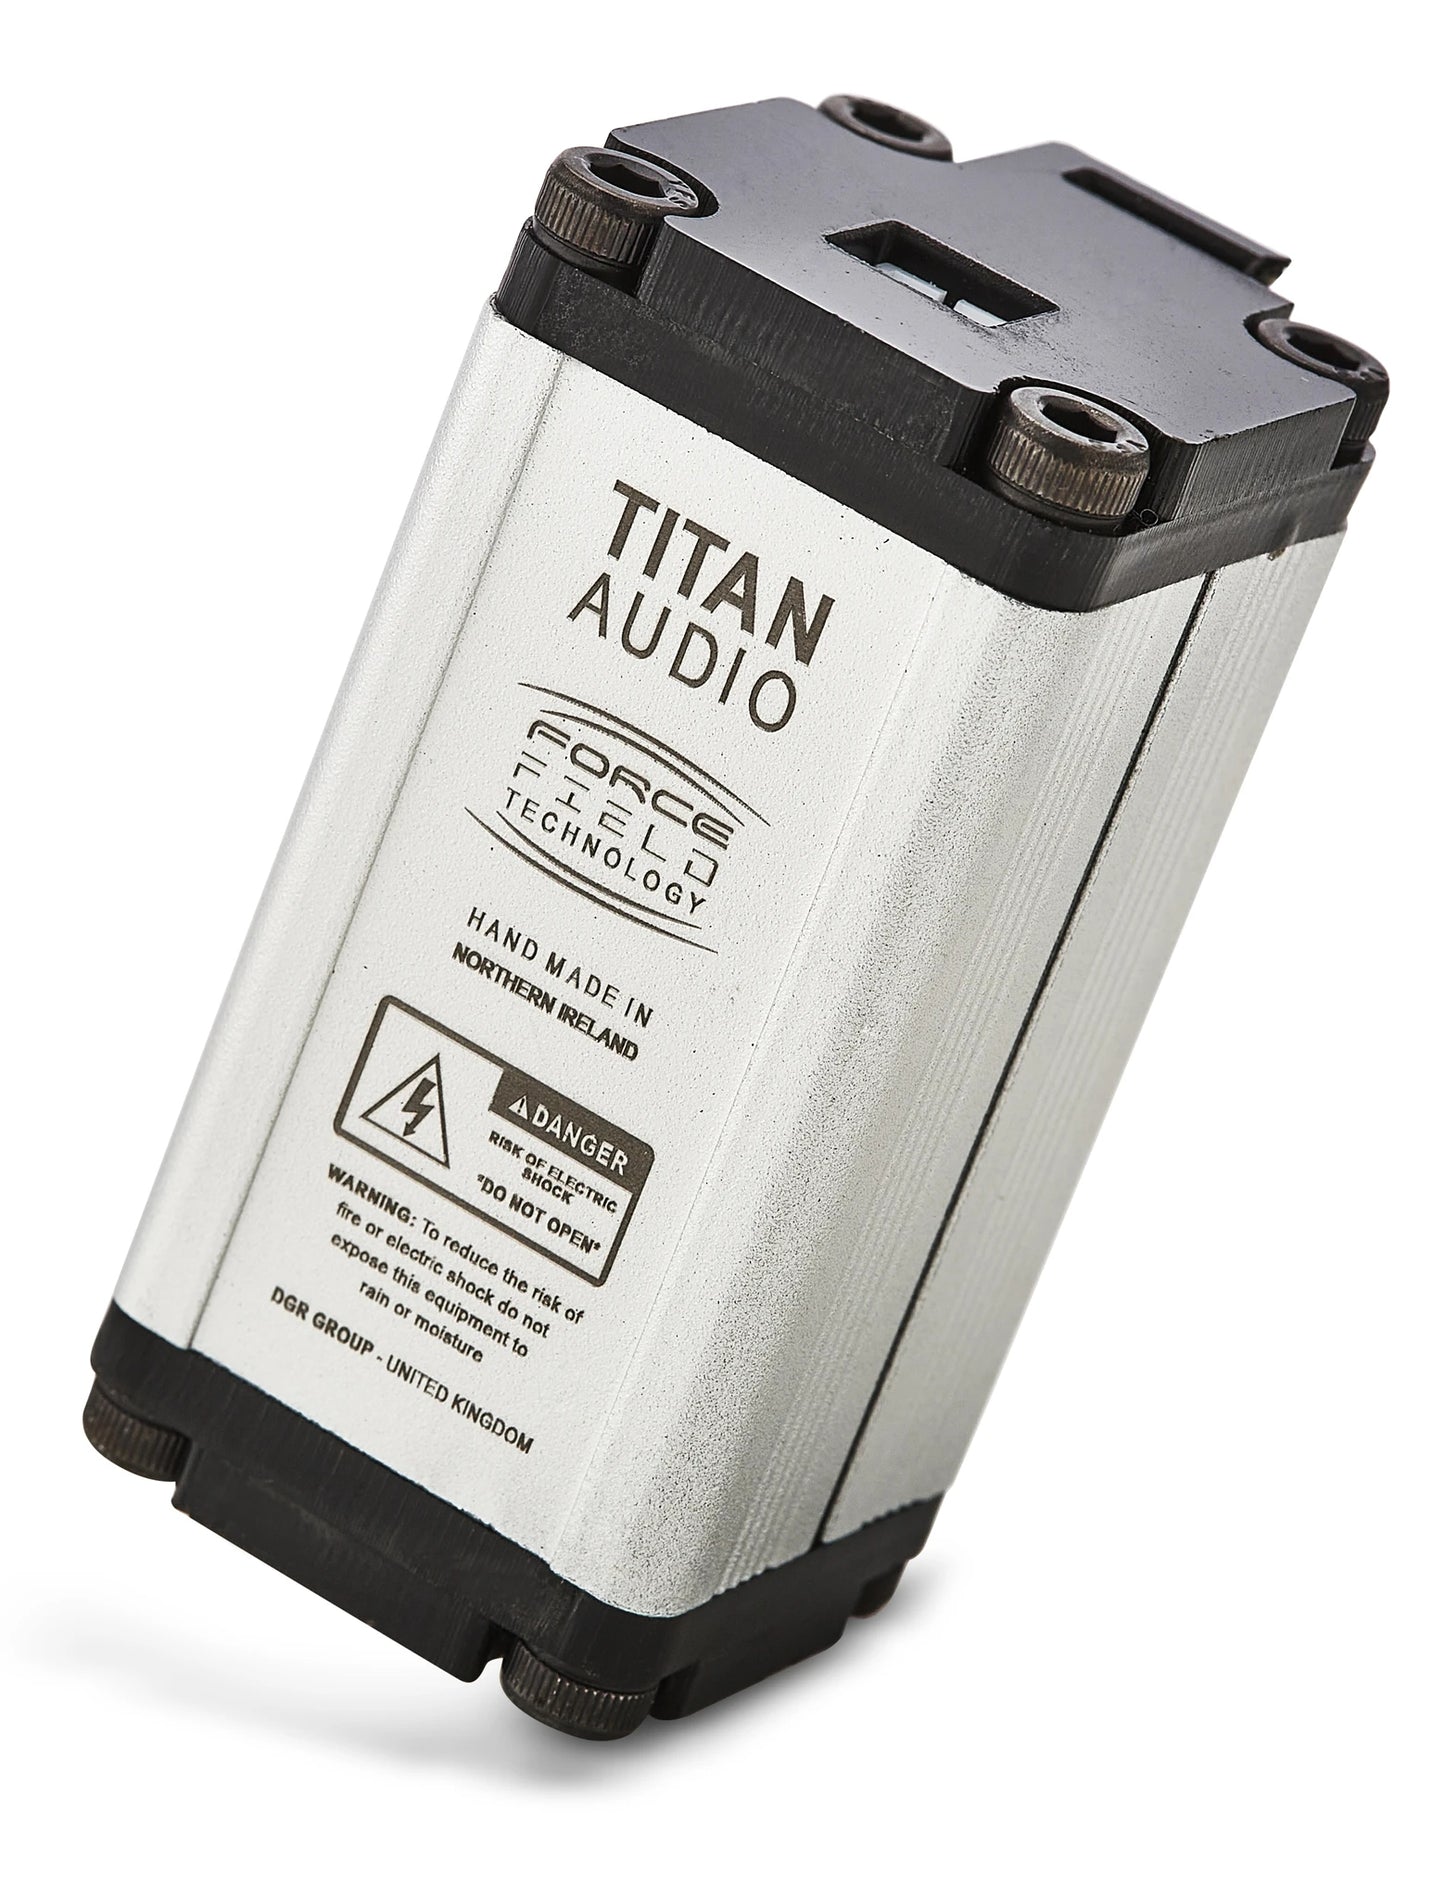 Titan Audio Eros Power Cord and Force Field Module (FFT) Combo